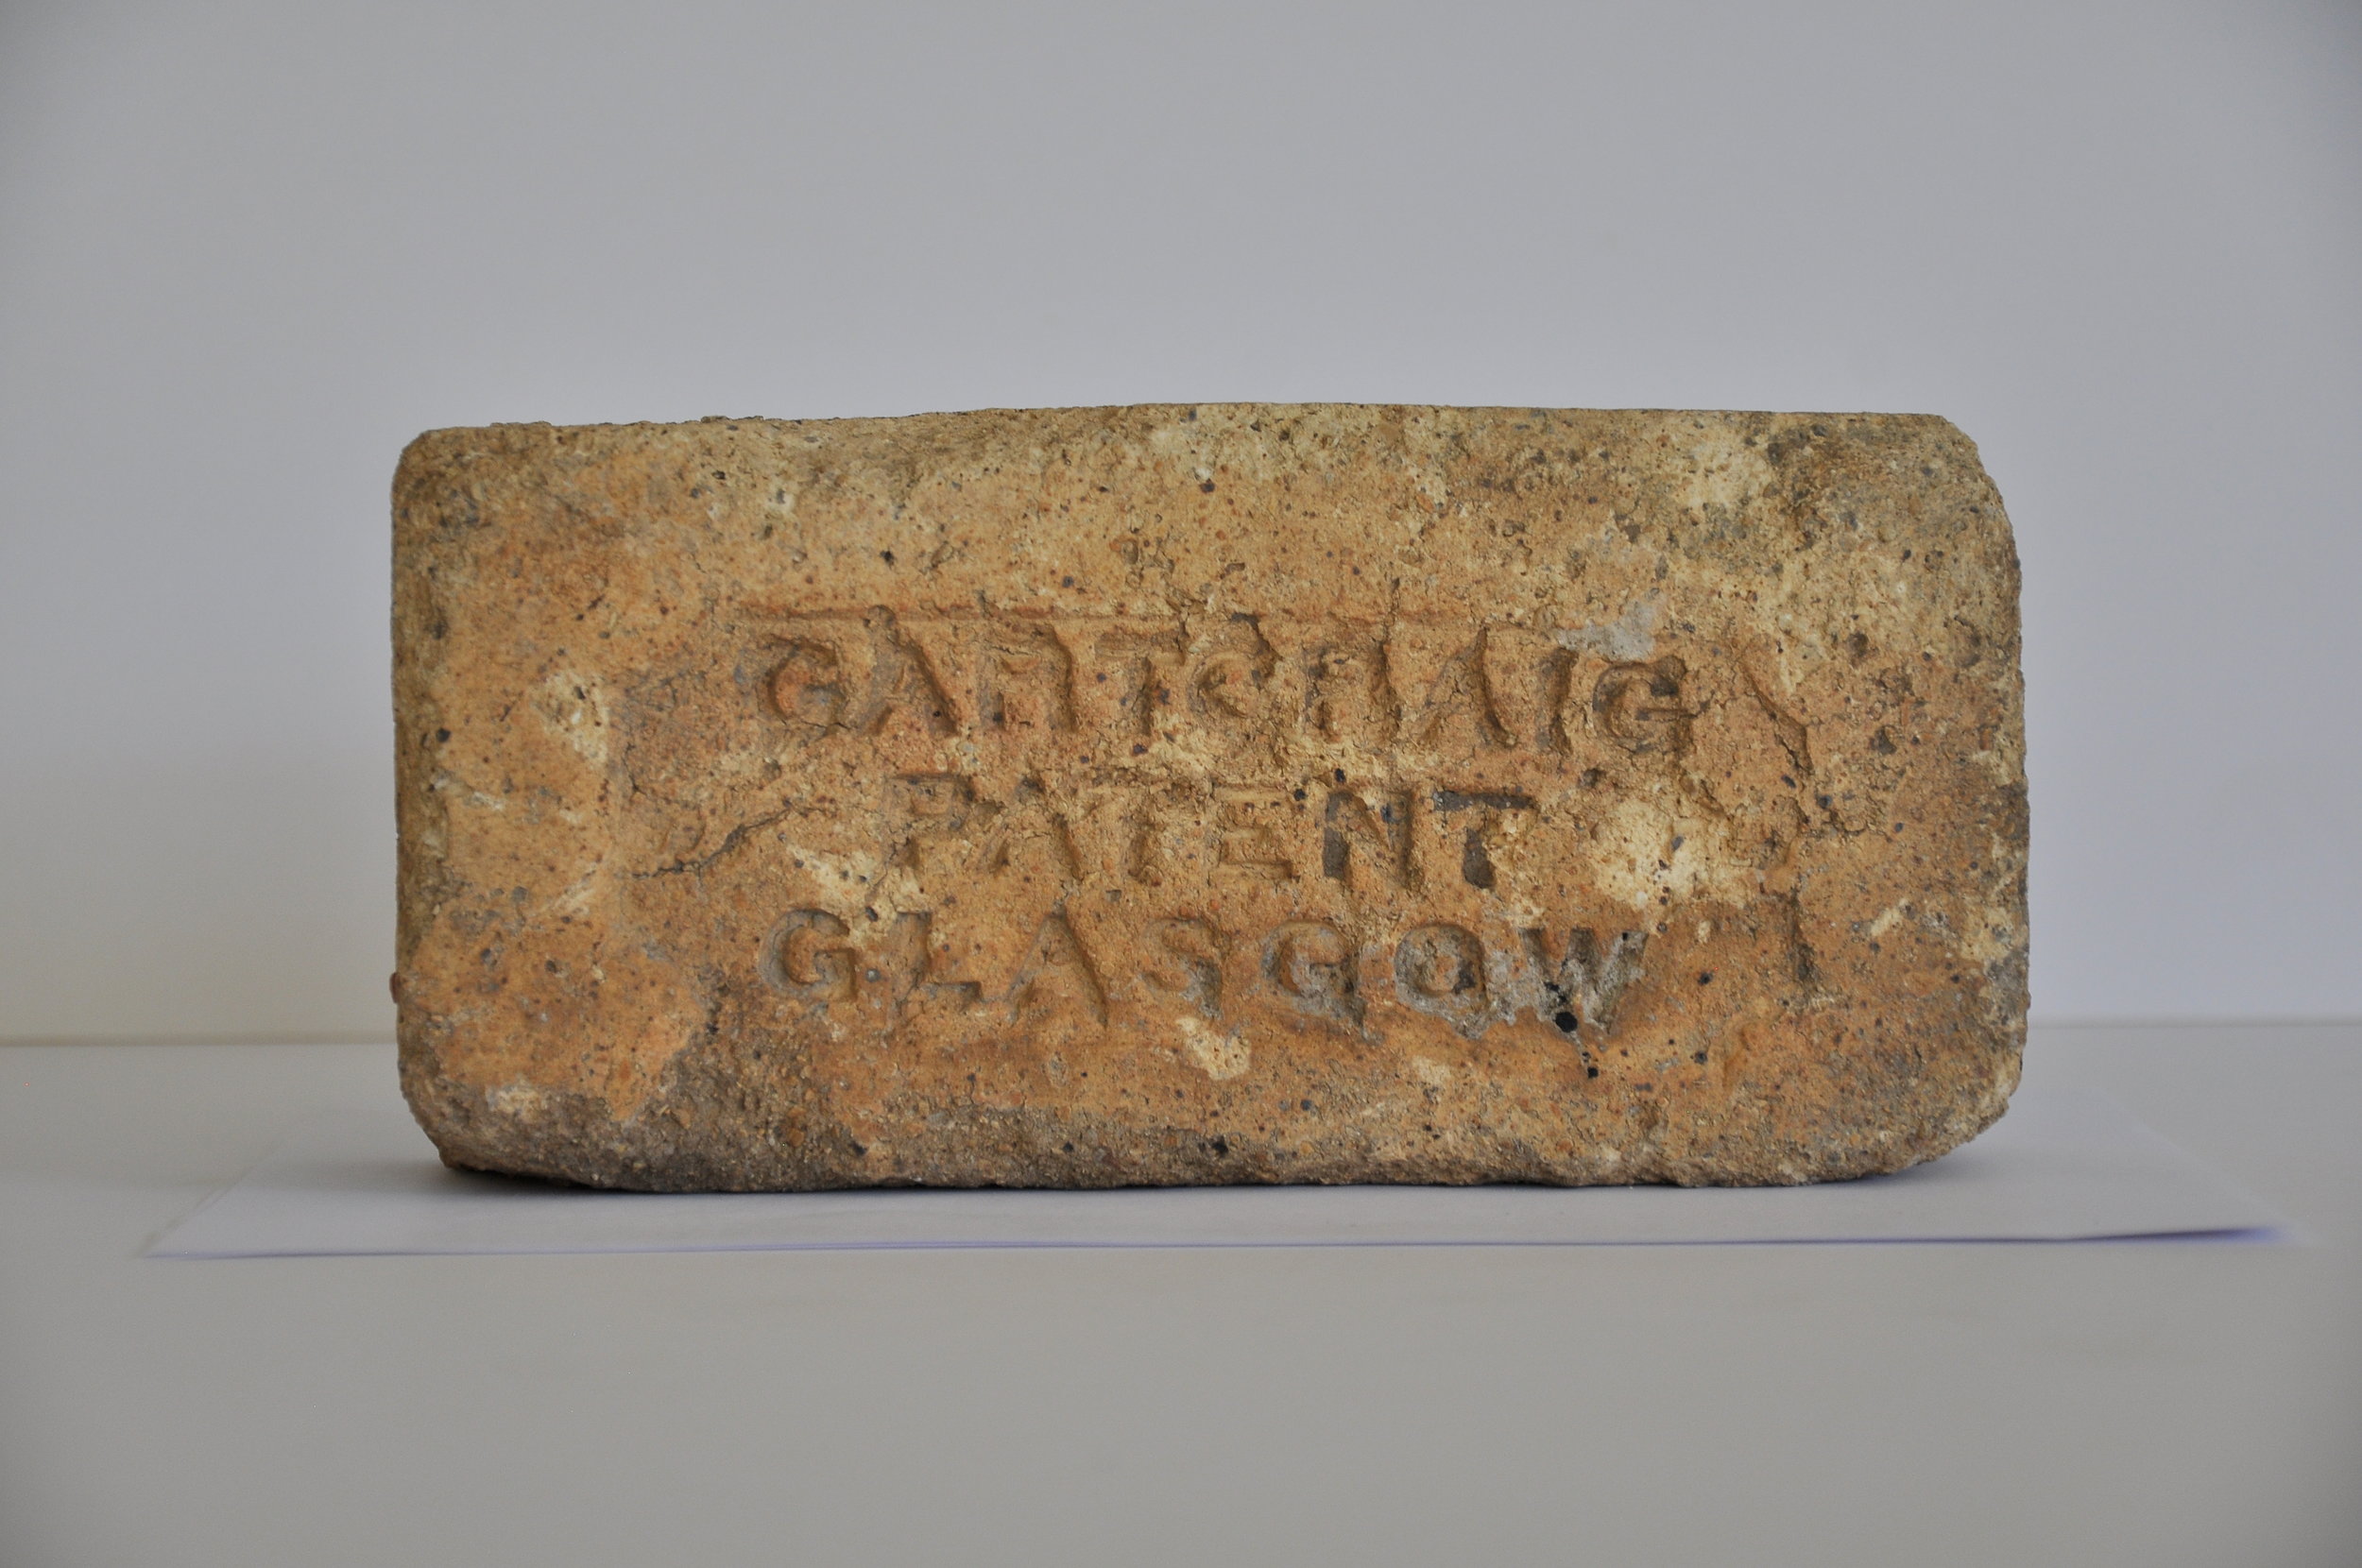 Ballast brick from Glasgow salvaged from the church